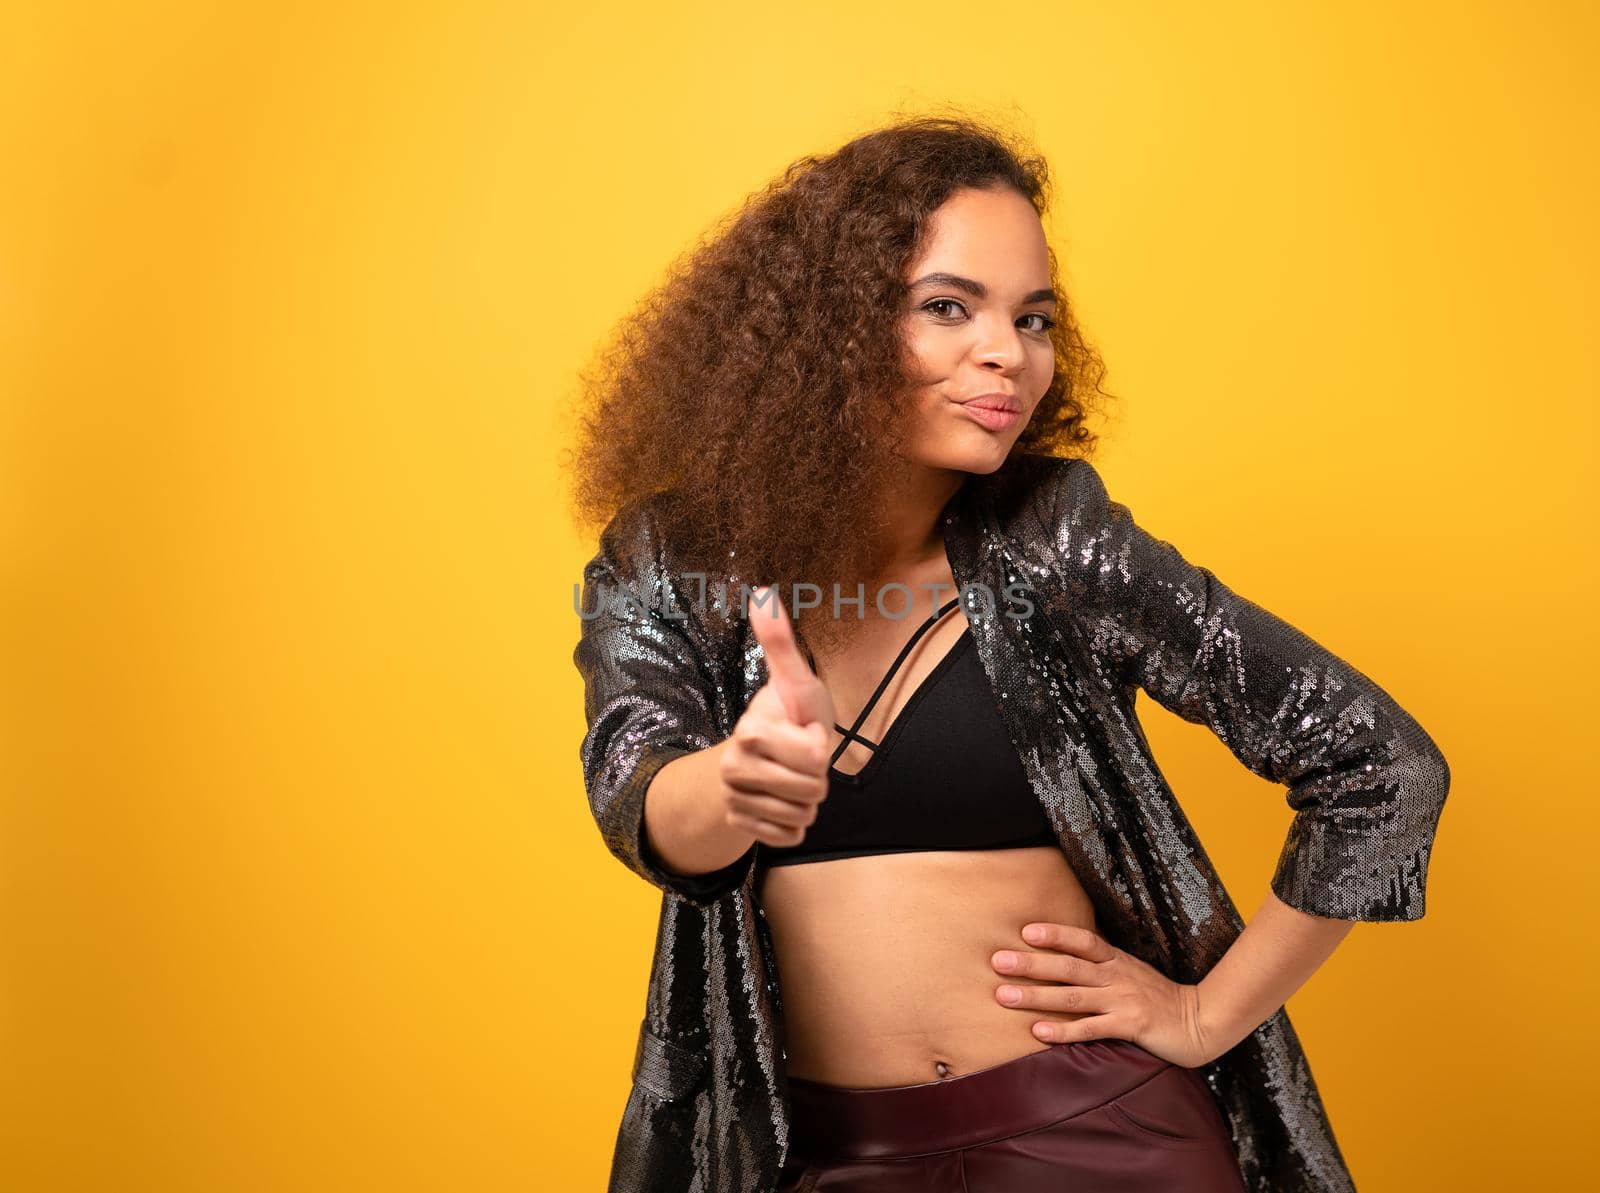 I got you. Beautiful young woman pointing finger with beautiful hairstyle smile looking at camera wearing shiny black jacket and black top. Happy young girl on yellow background.